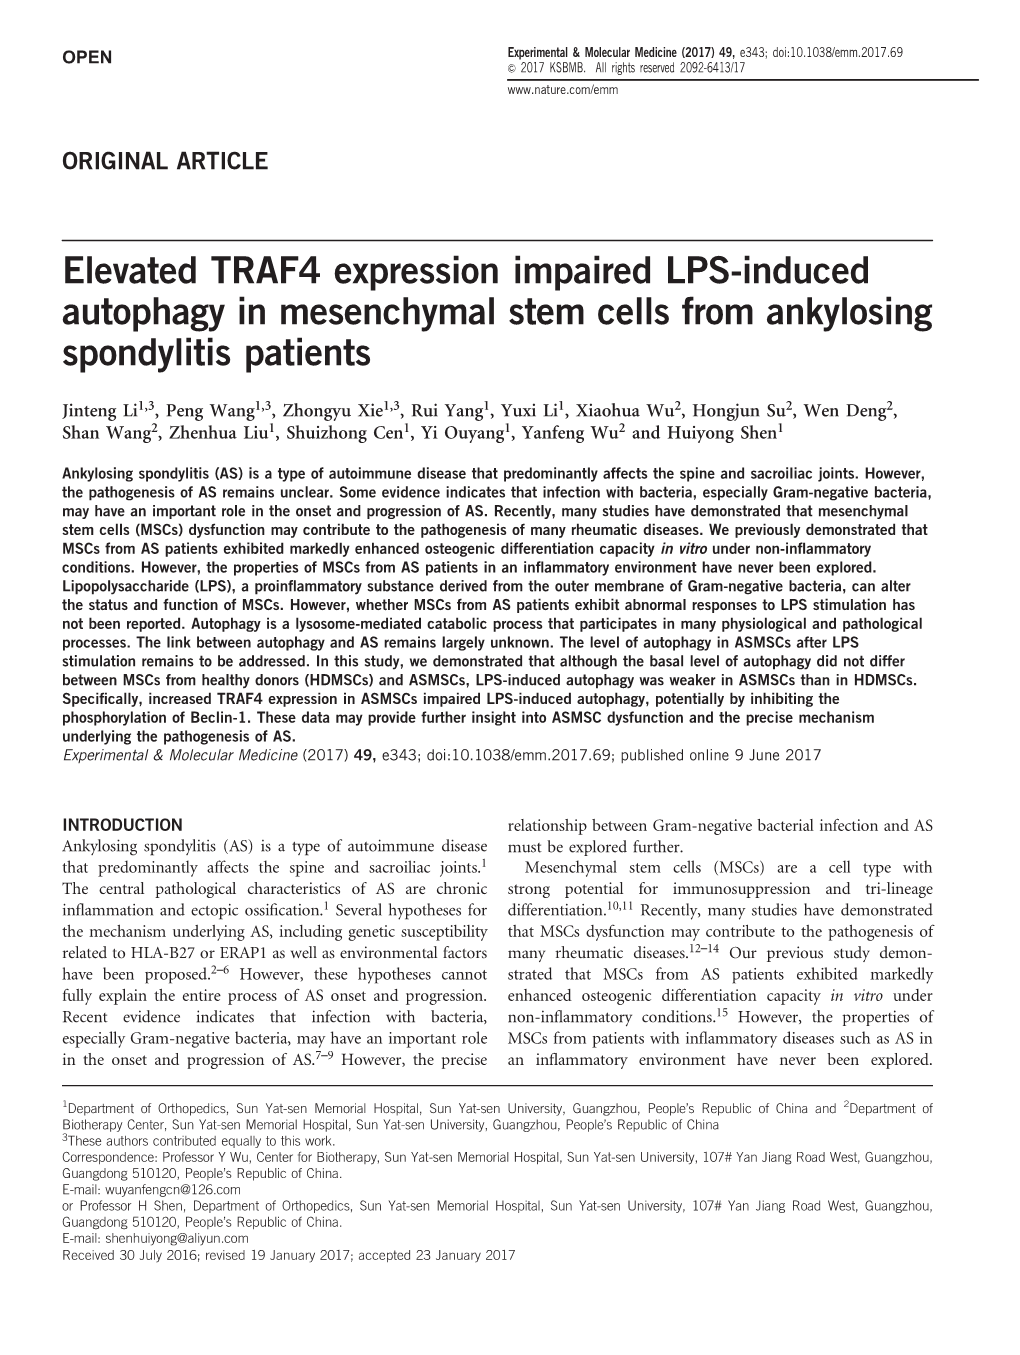 Elevated TRAF4 Expression Impaired LPS-Induced Autophagy in Mesenchymal Stem Cells from Ankylosing Spondylitis Patients